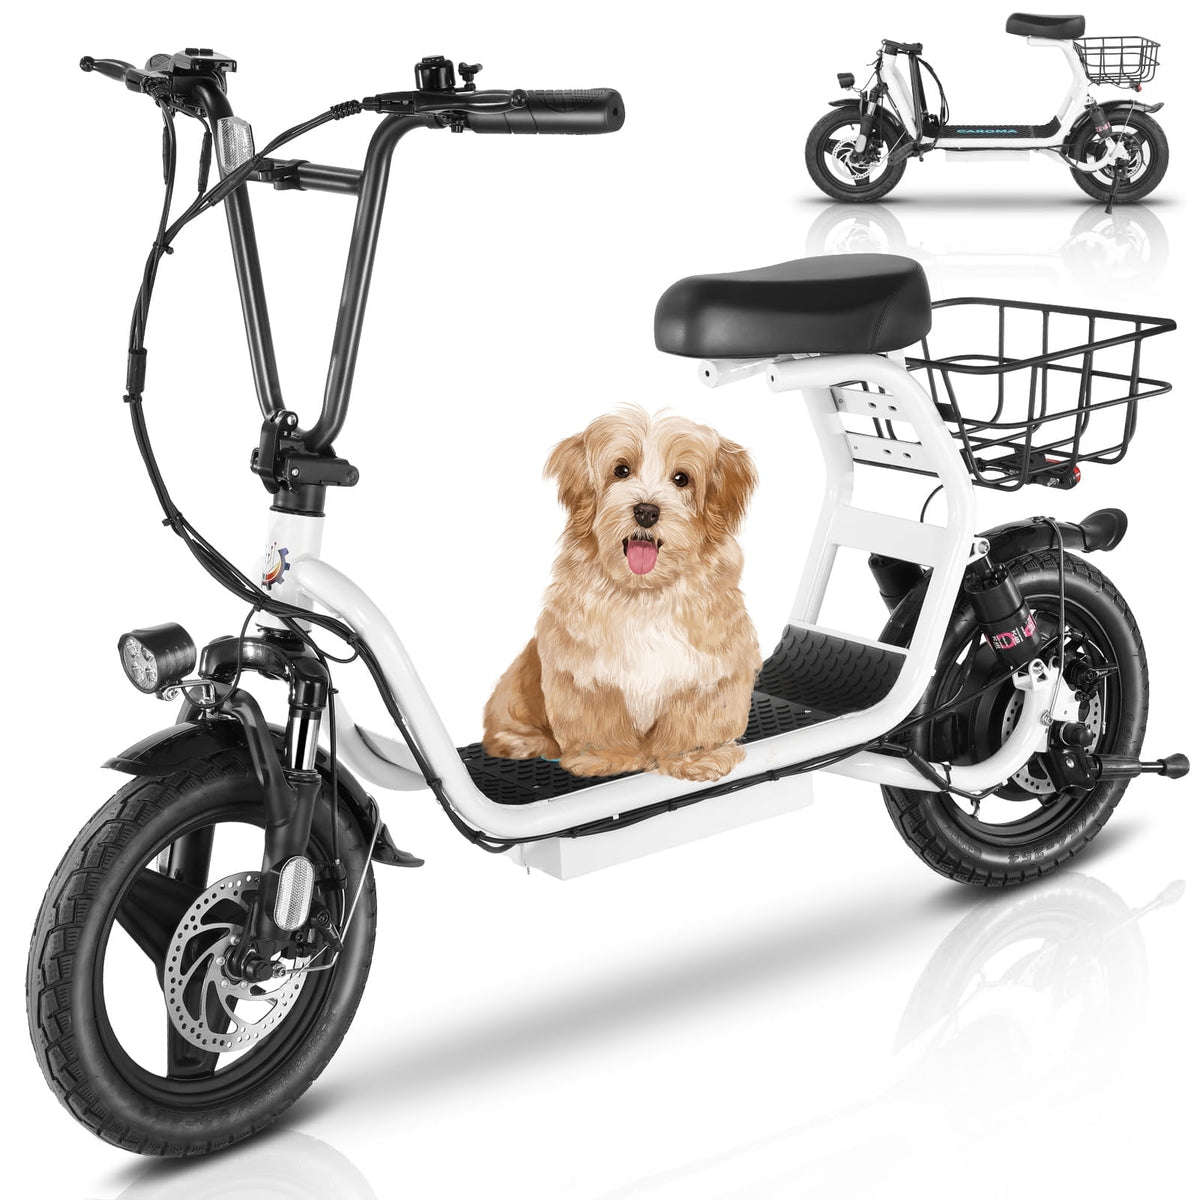 Caroma 500W Electric Scooter with Seat for Adult, 20 Mph Bike with Basket, 300lbs Max Load and 14" Fat Tire E Mopeds